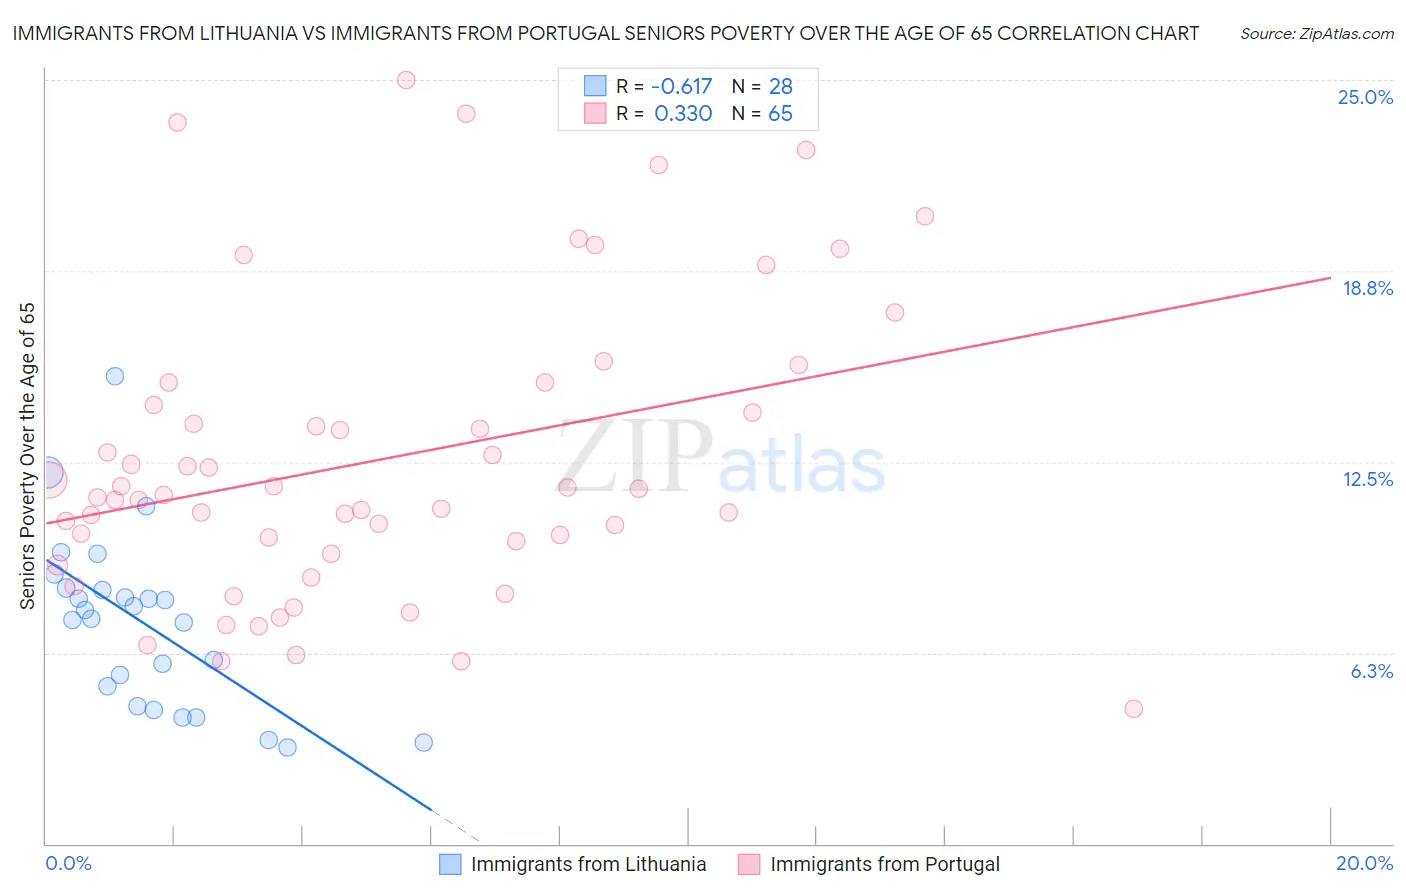 Immigrants from Lithuania vs Immigrants from Portugal Seniors Poverty Over the Age of 65